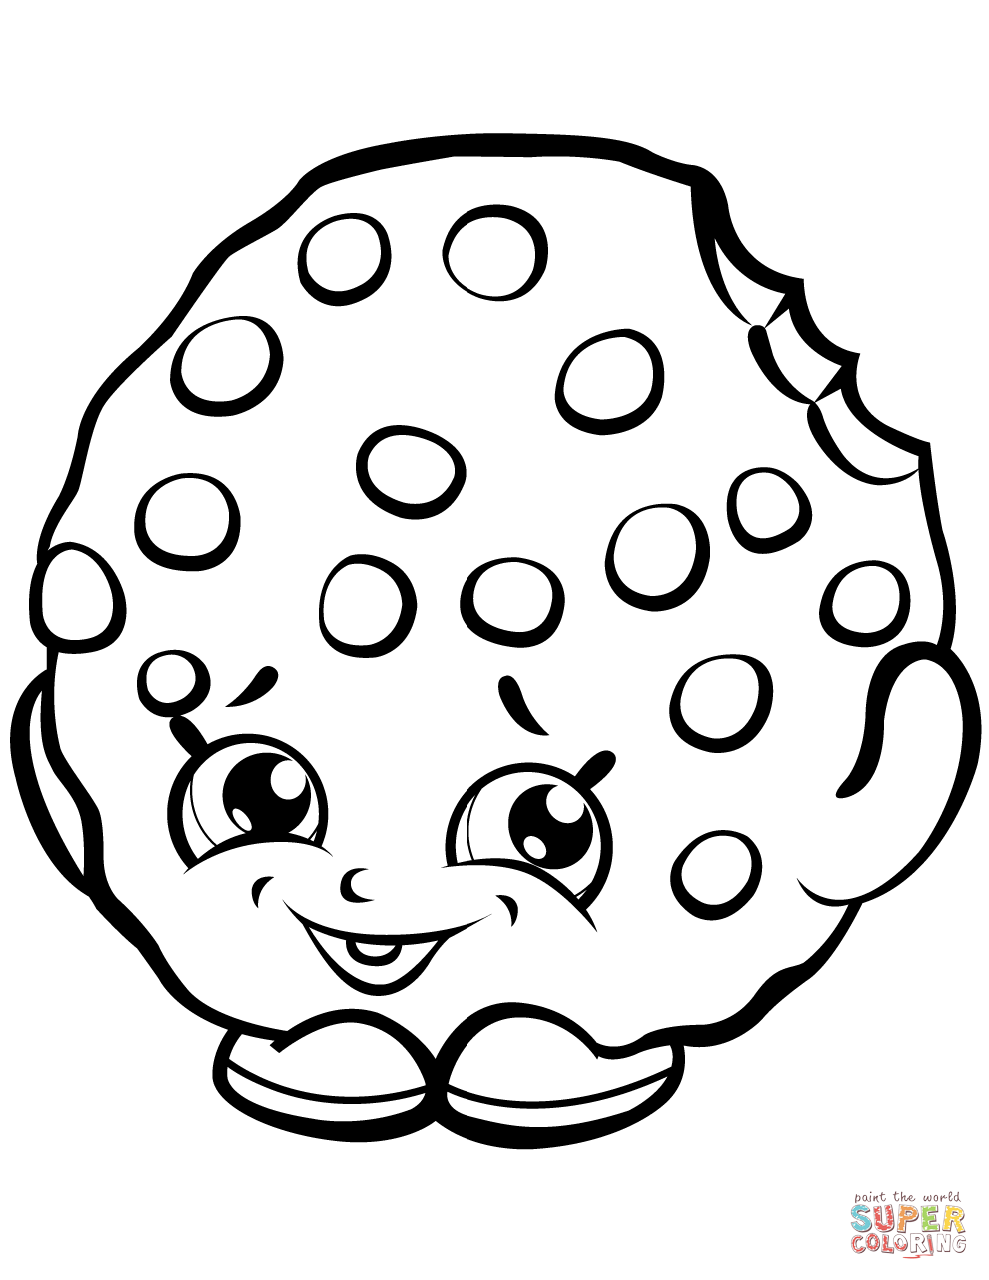 Kooky cookie shopkin coloring page free printable coloring pages